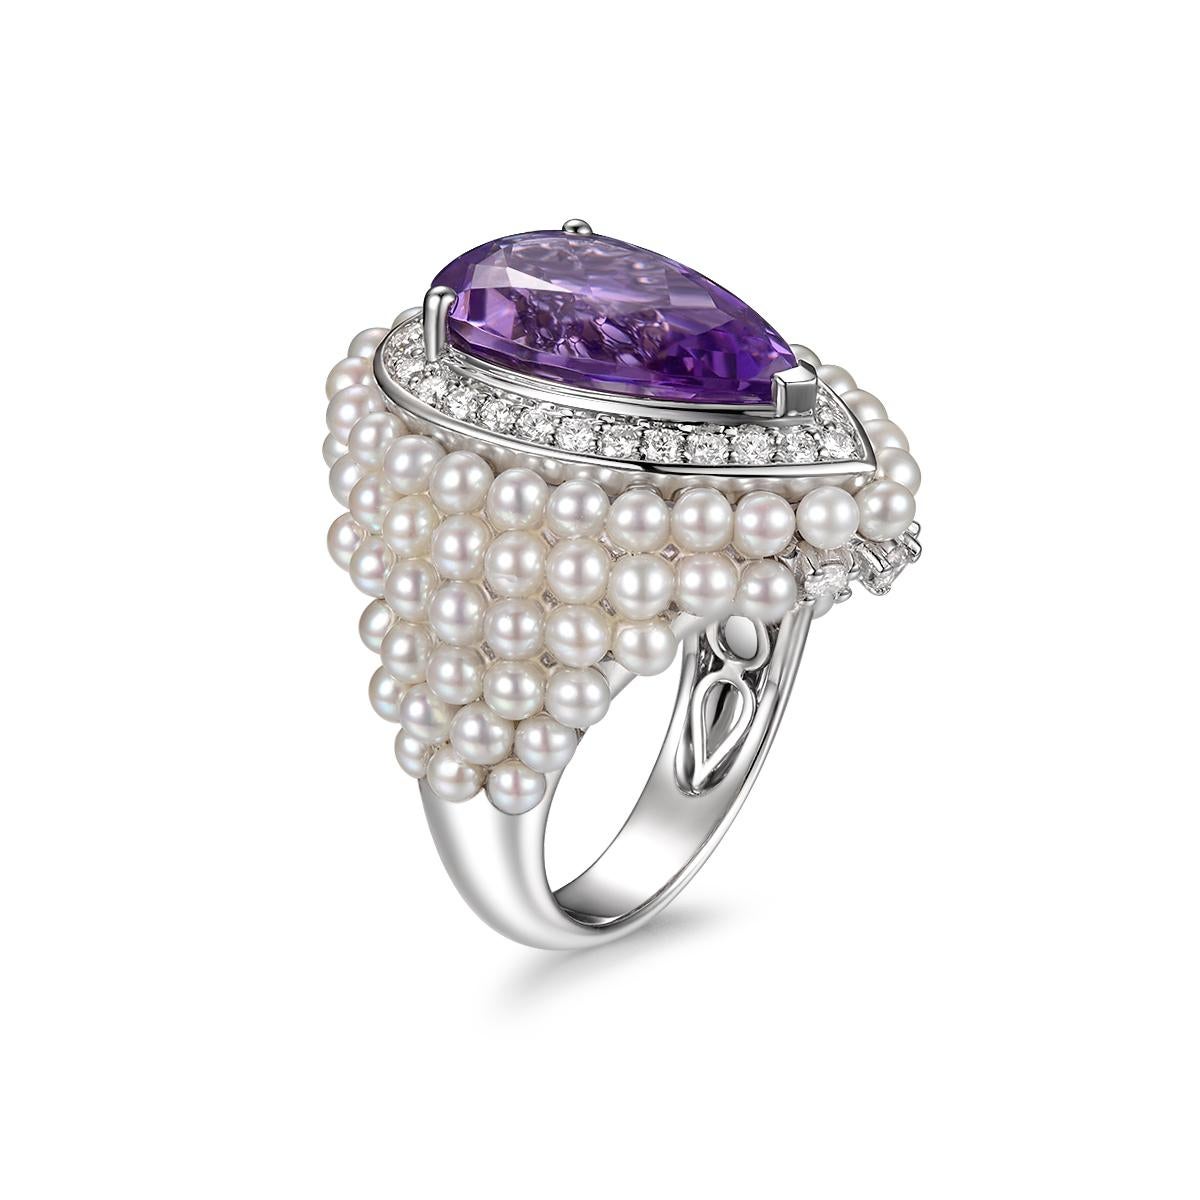 A White Gold, Amethyst and Freshwater Pearl Ring created by Sisi.
14 karat white gold centering one pear-cut amethyst weight 5.66 carat ,within a bubbling mount of freshwater pearls, accented with 0.61 carat of white round brilliance diamond. 